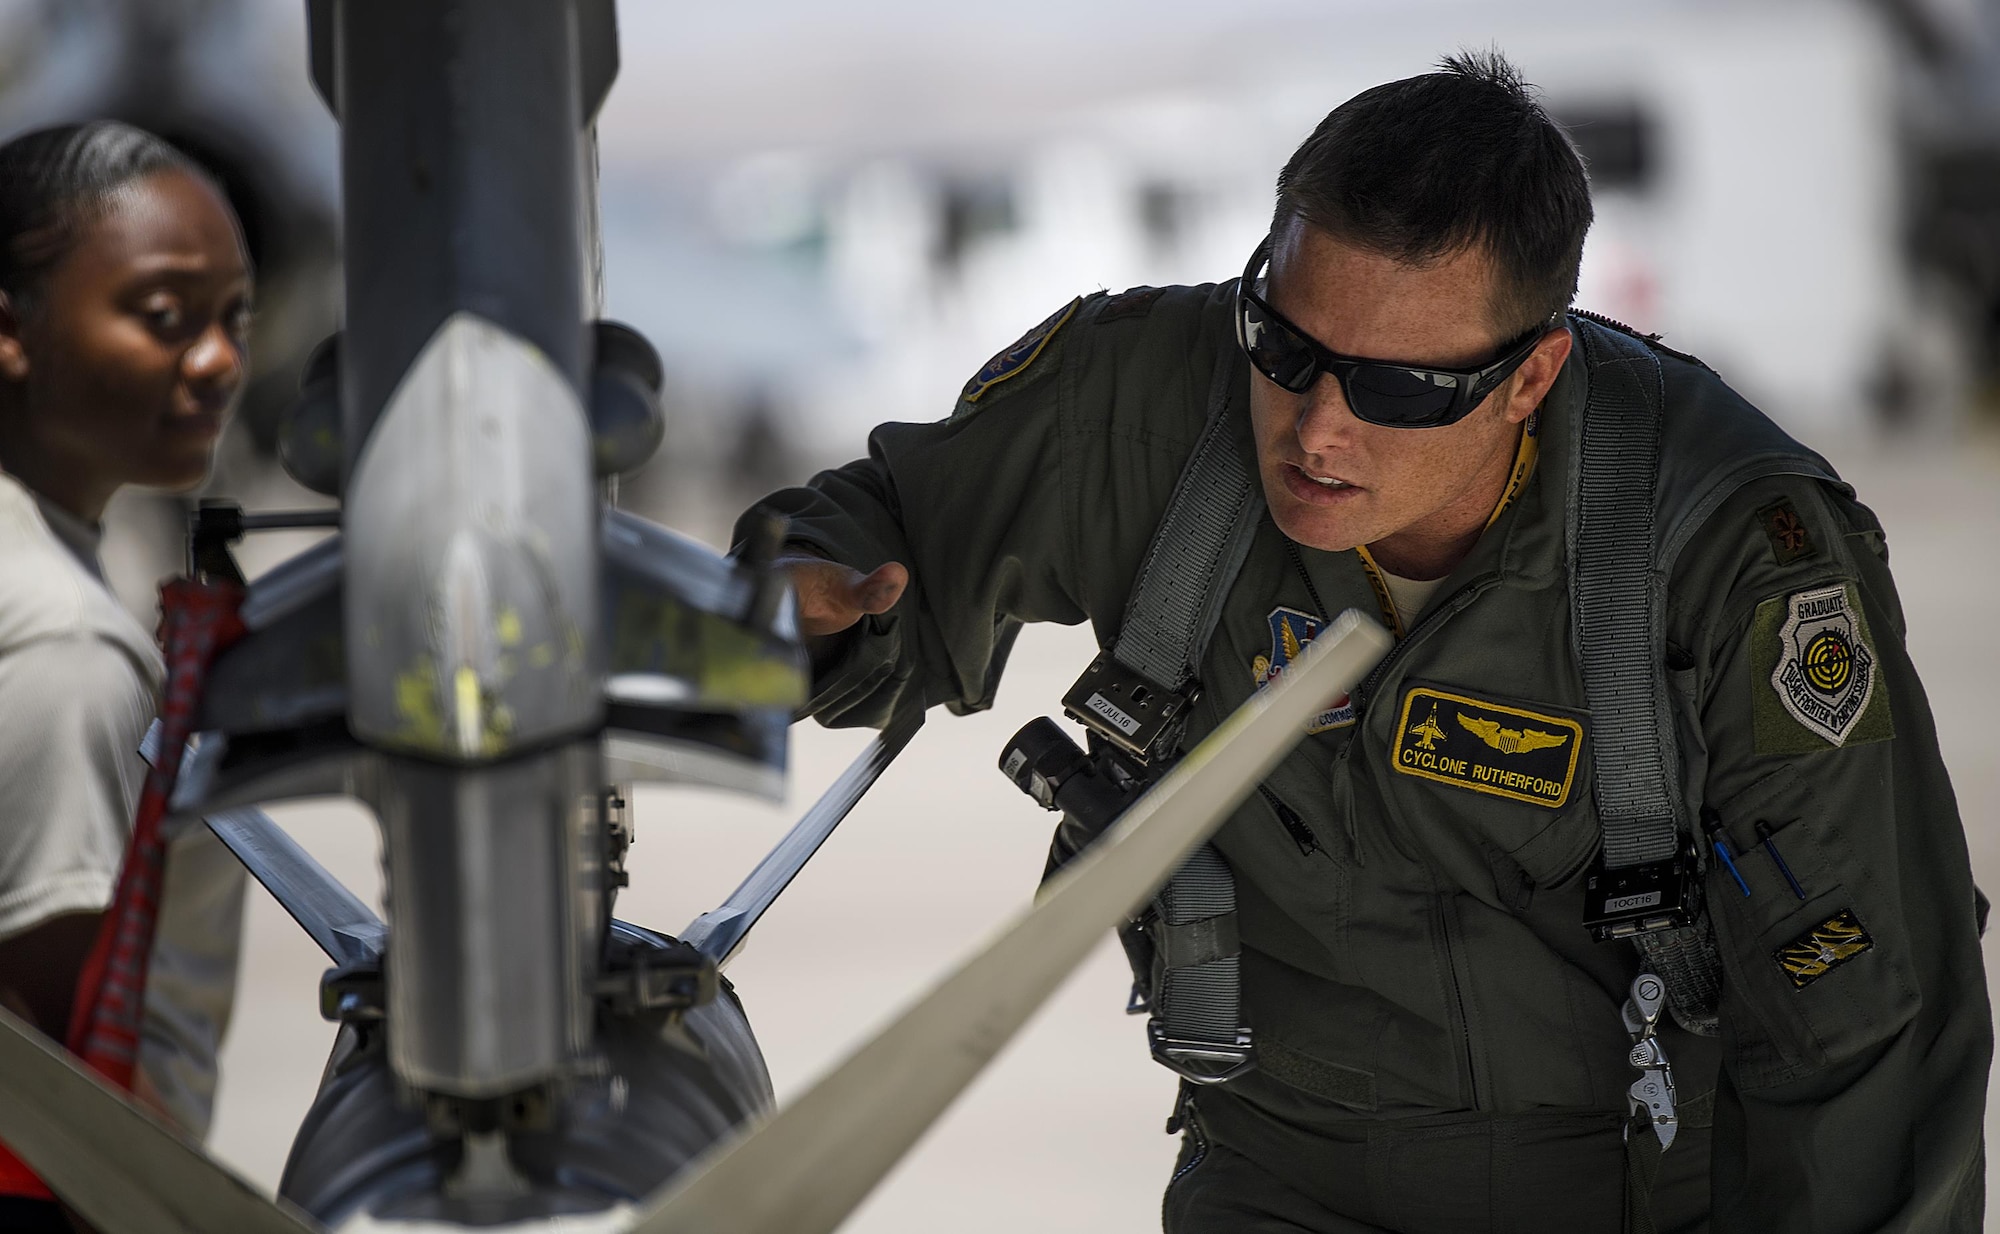 Maj. Kyle Ruthford, an F-16 Fighting Falcon pilot from Shaw Air Force Base's 79th Fighter Squadron, conducts pre-flight inspections day 1 of Red Flag, July 11, 2016 at Nellis Air Force Base, Nevada. The exercise will test participants’' ability to operate in air, cyberspace and space. (U.S. Air Force photo/Tech. Sgt. David Salanitri)